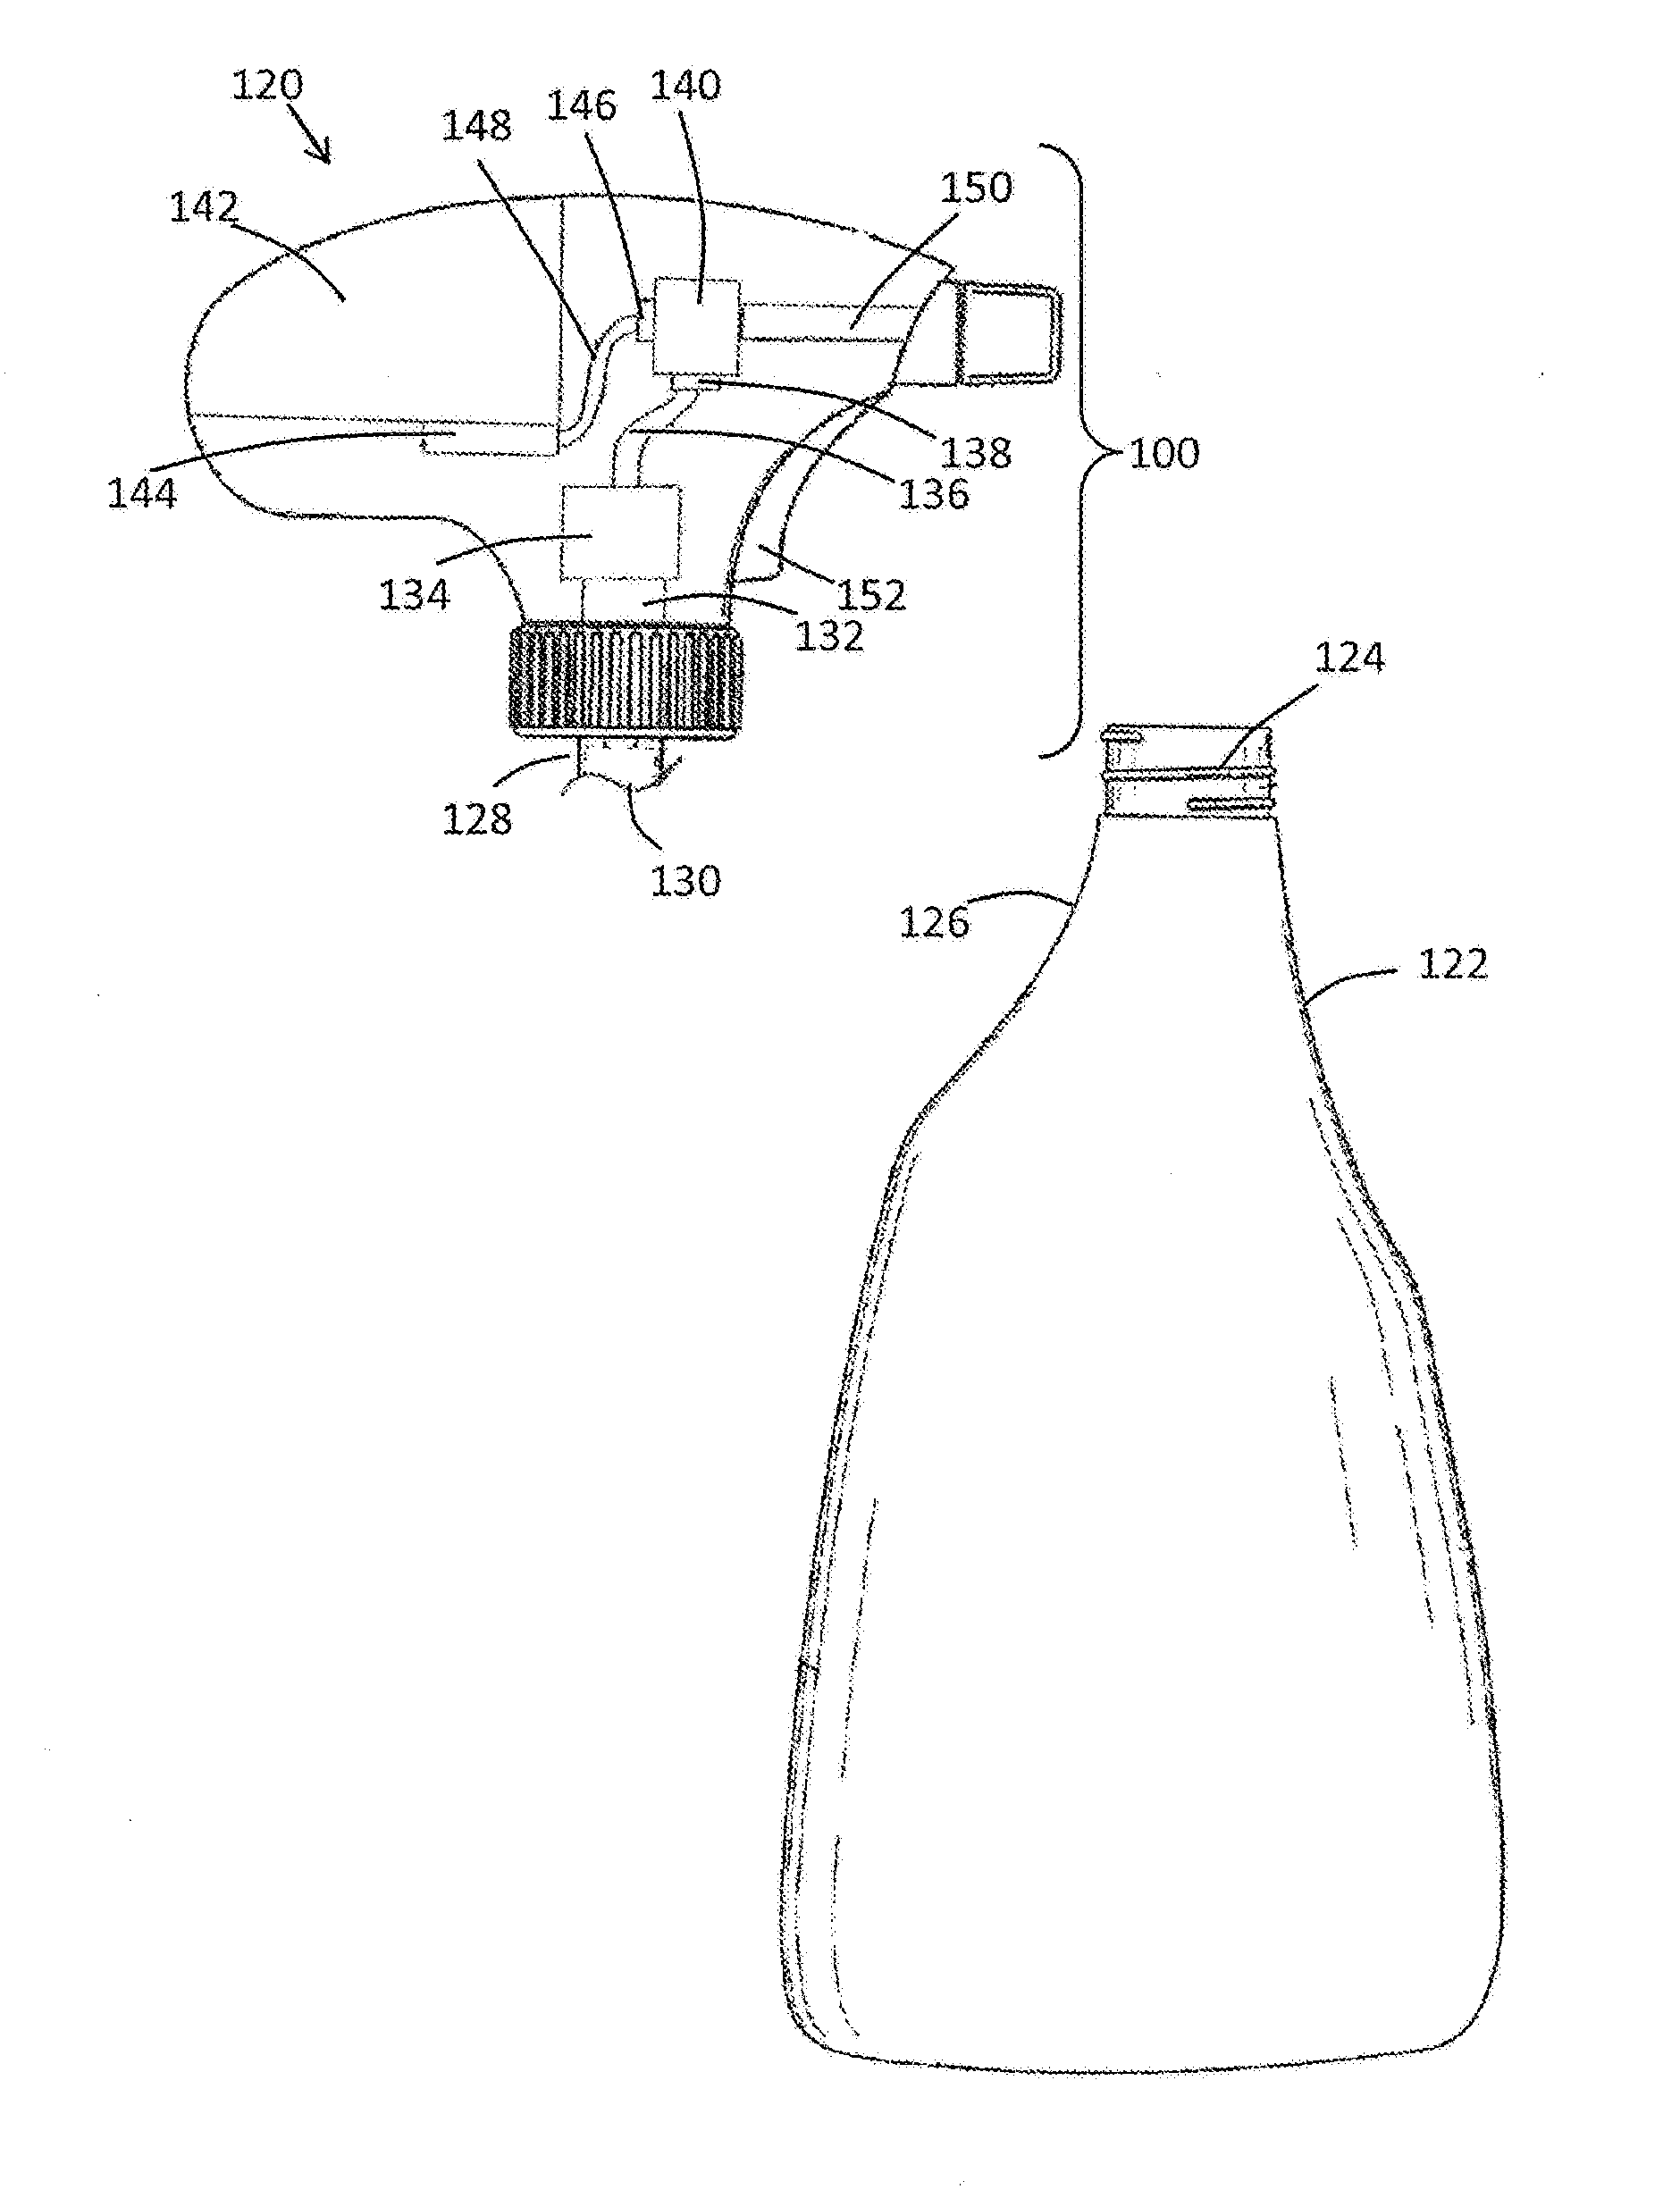 System for spraying a dispensable material and methods relating thereto